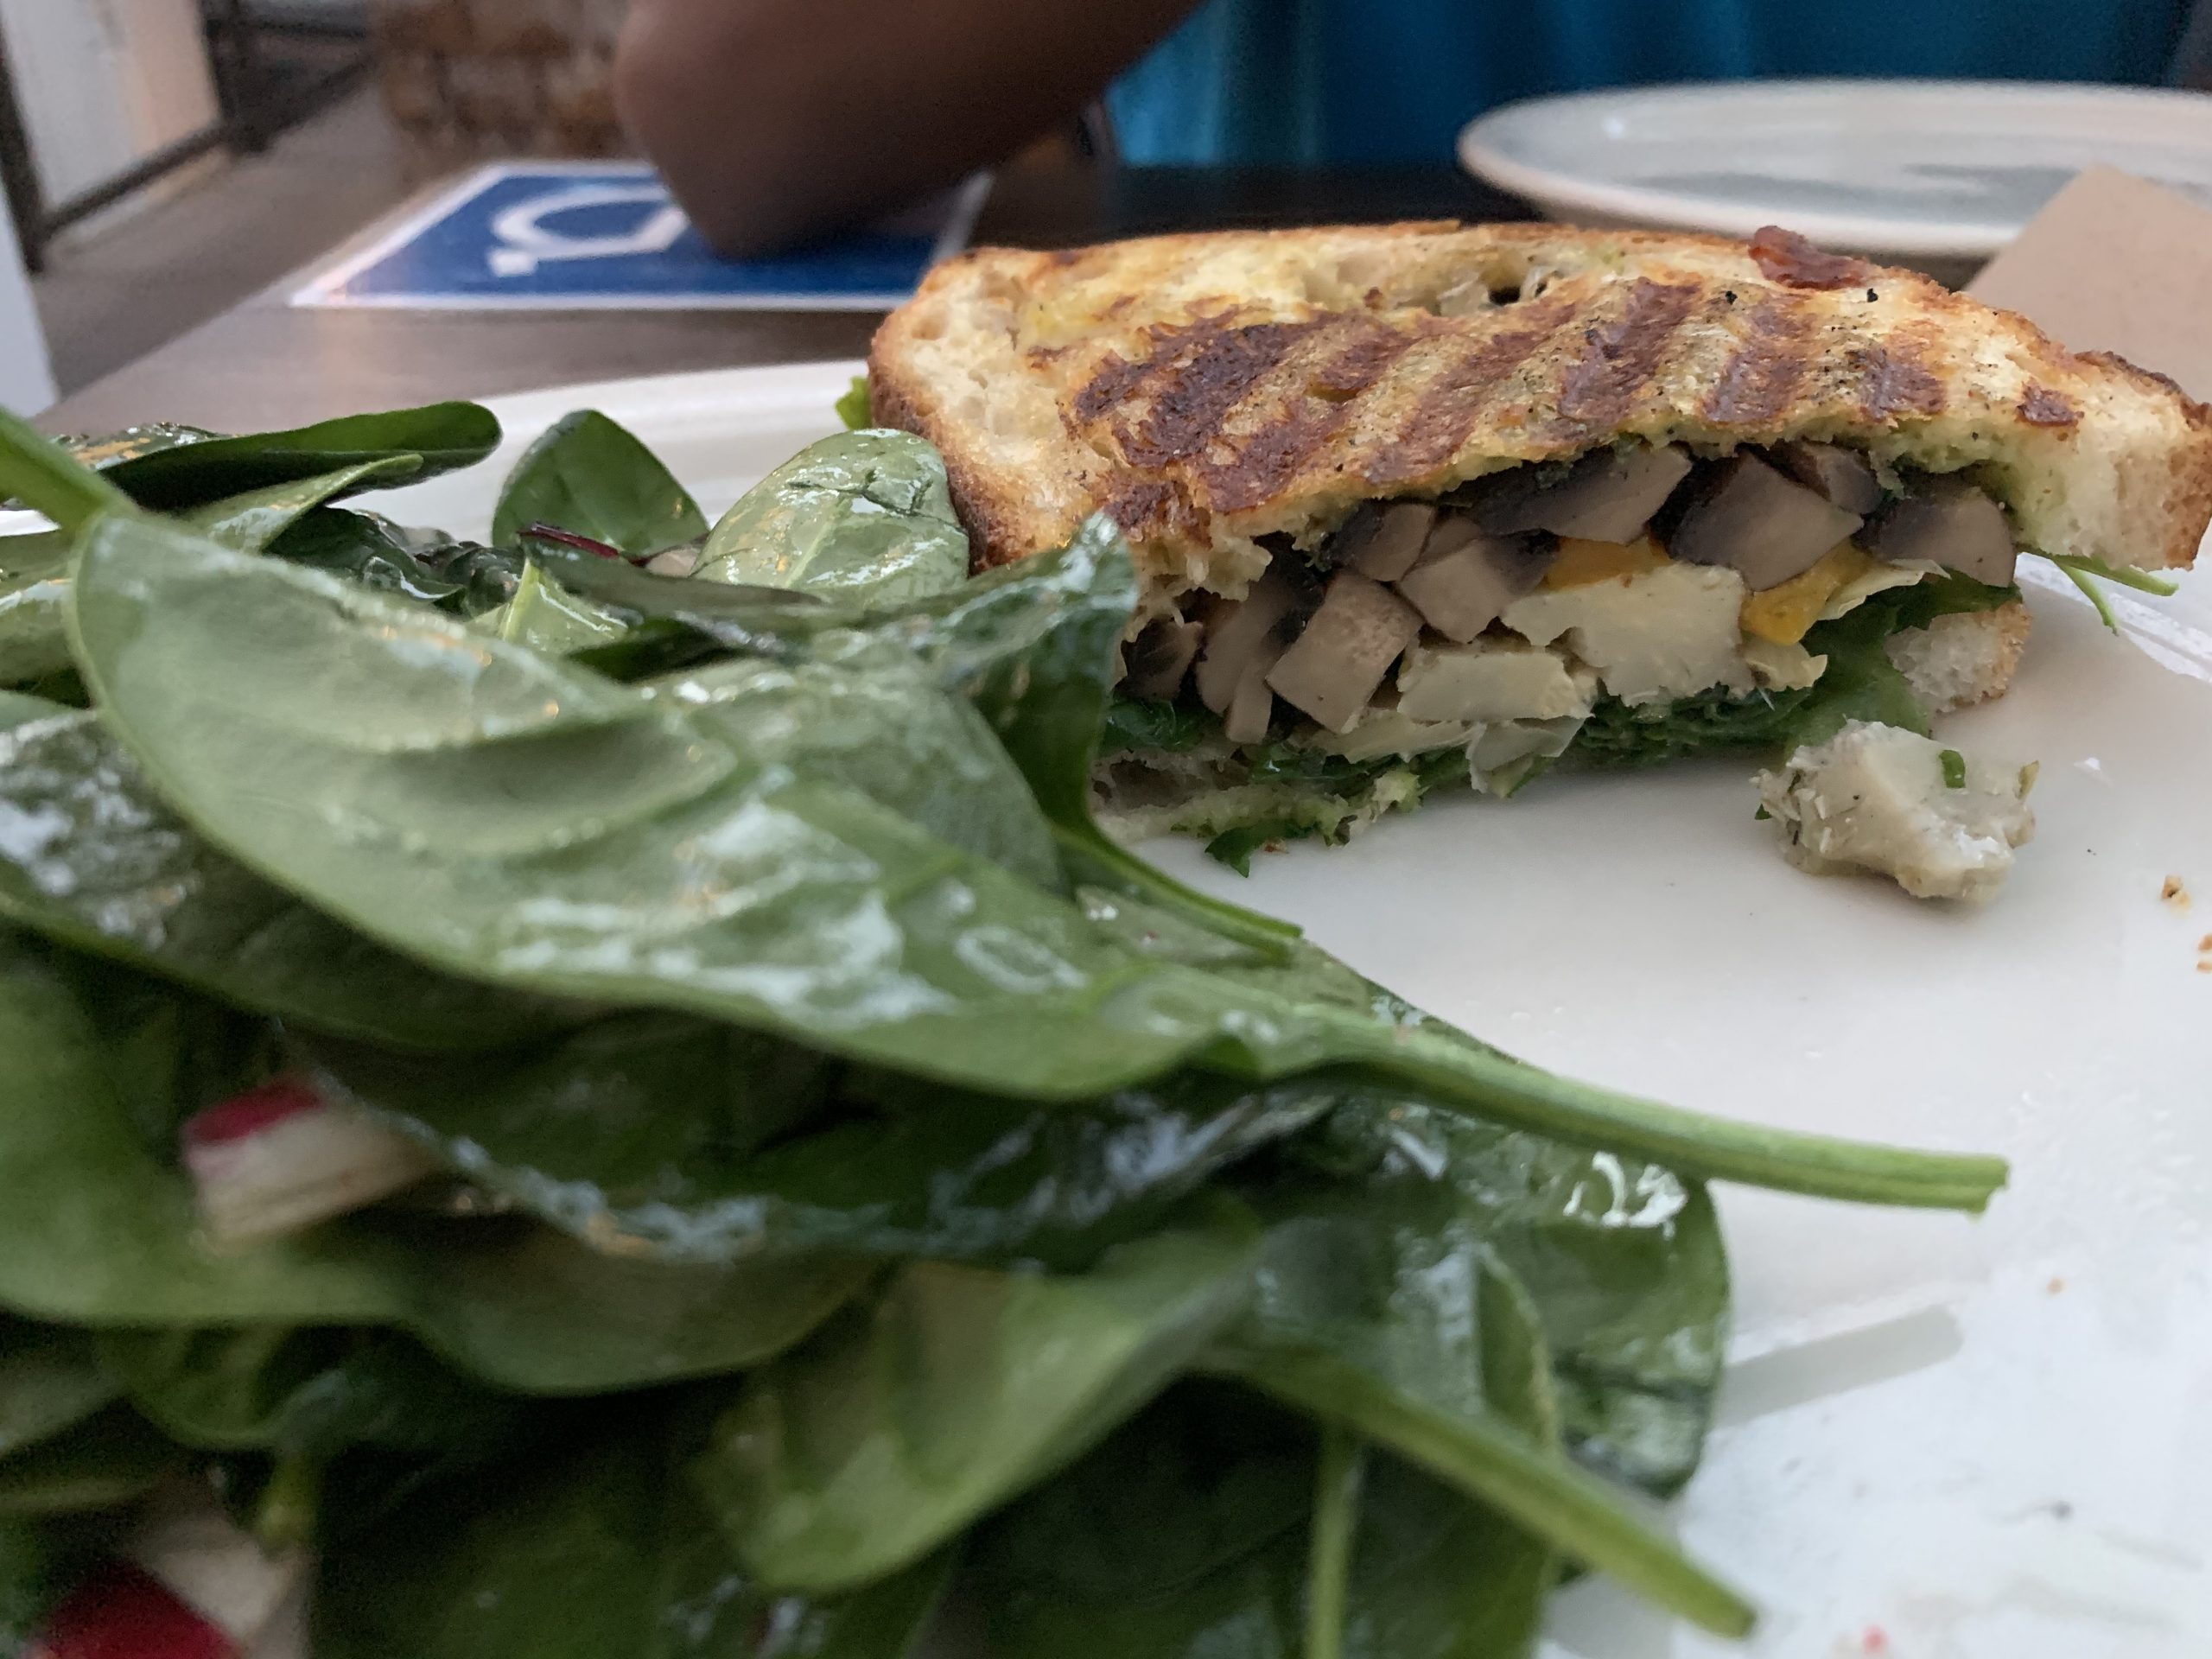 Review of Urth Caffe's organic coffee and Food